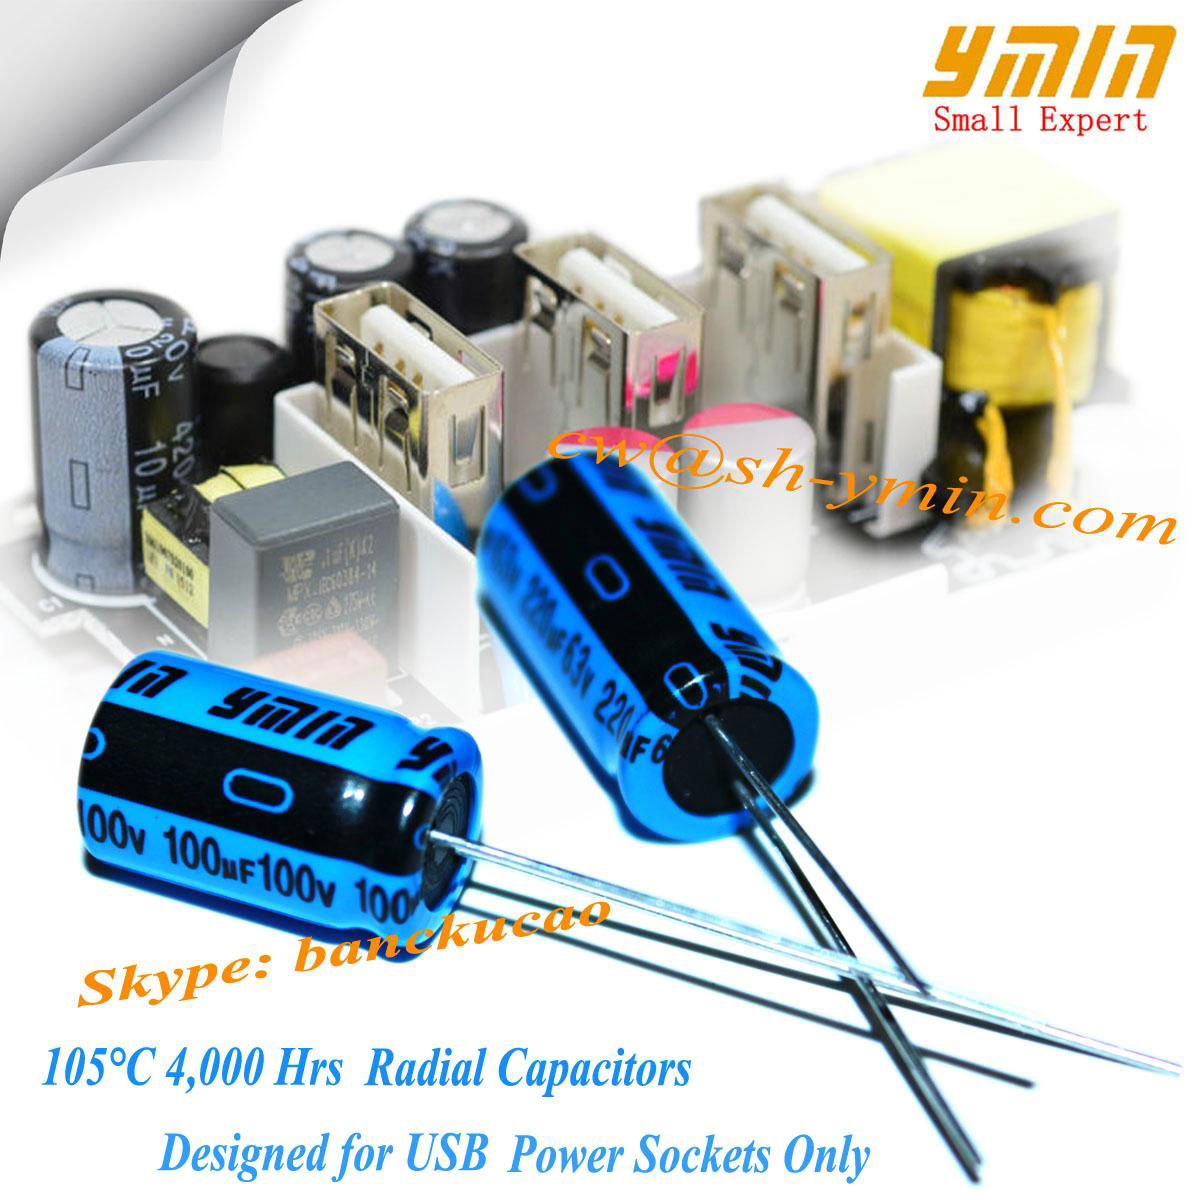 100V 100uF Capacitors Radial Electrolytic Capacitors for Solar LED Light